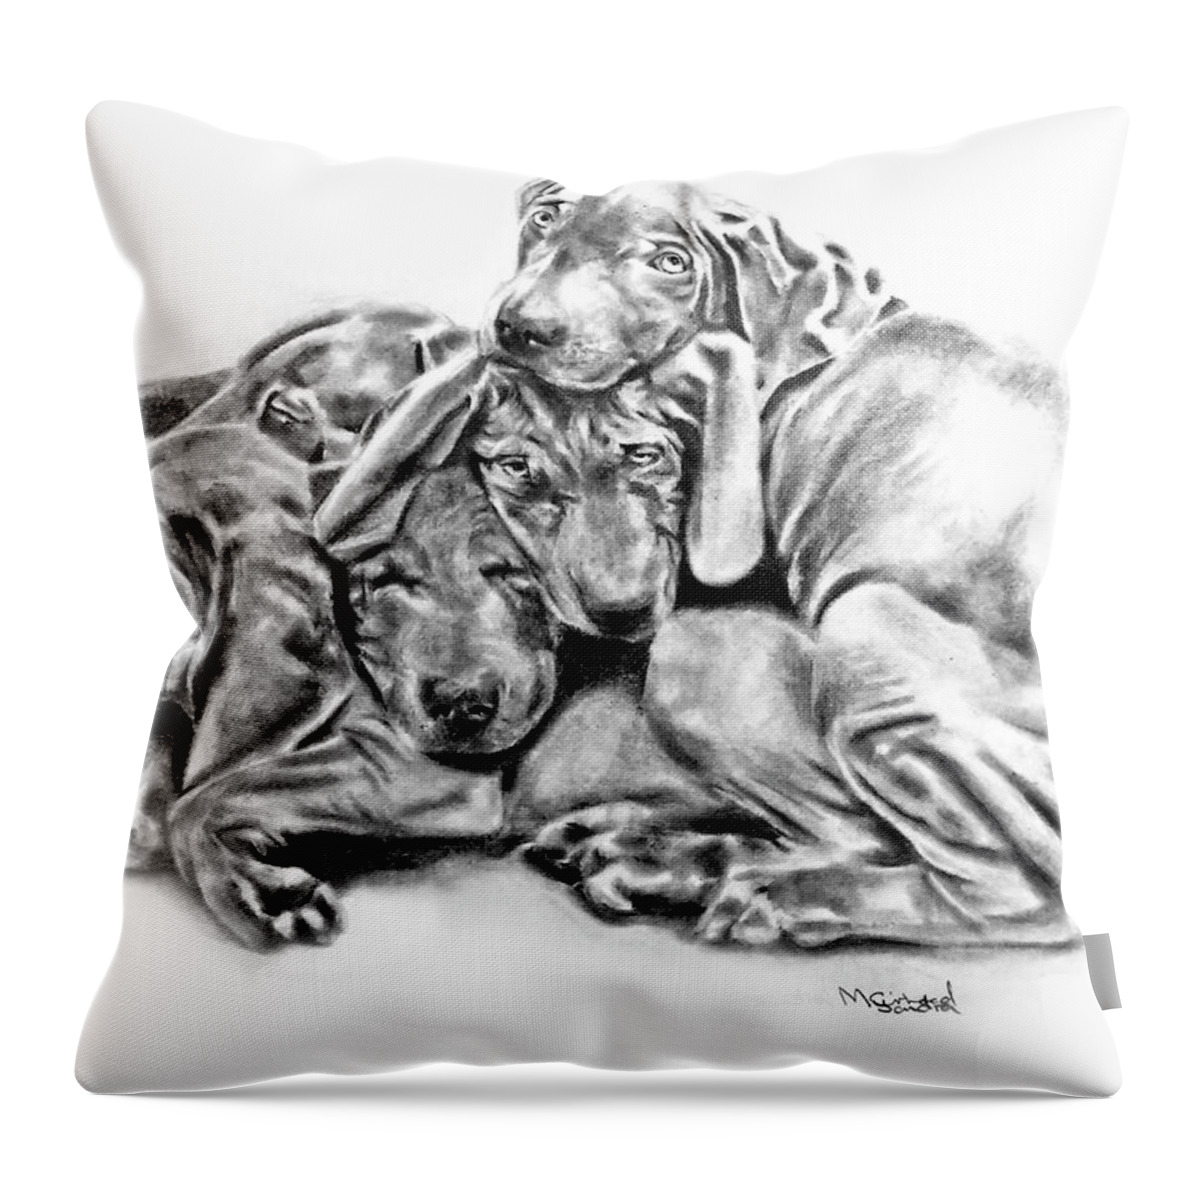 Mango's Pups Throw Pillow featuring the drawing Mango's pups #1 by Sandra Muirhead